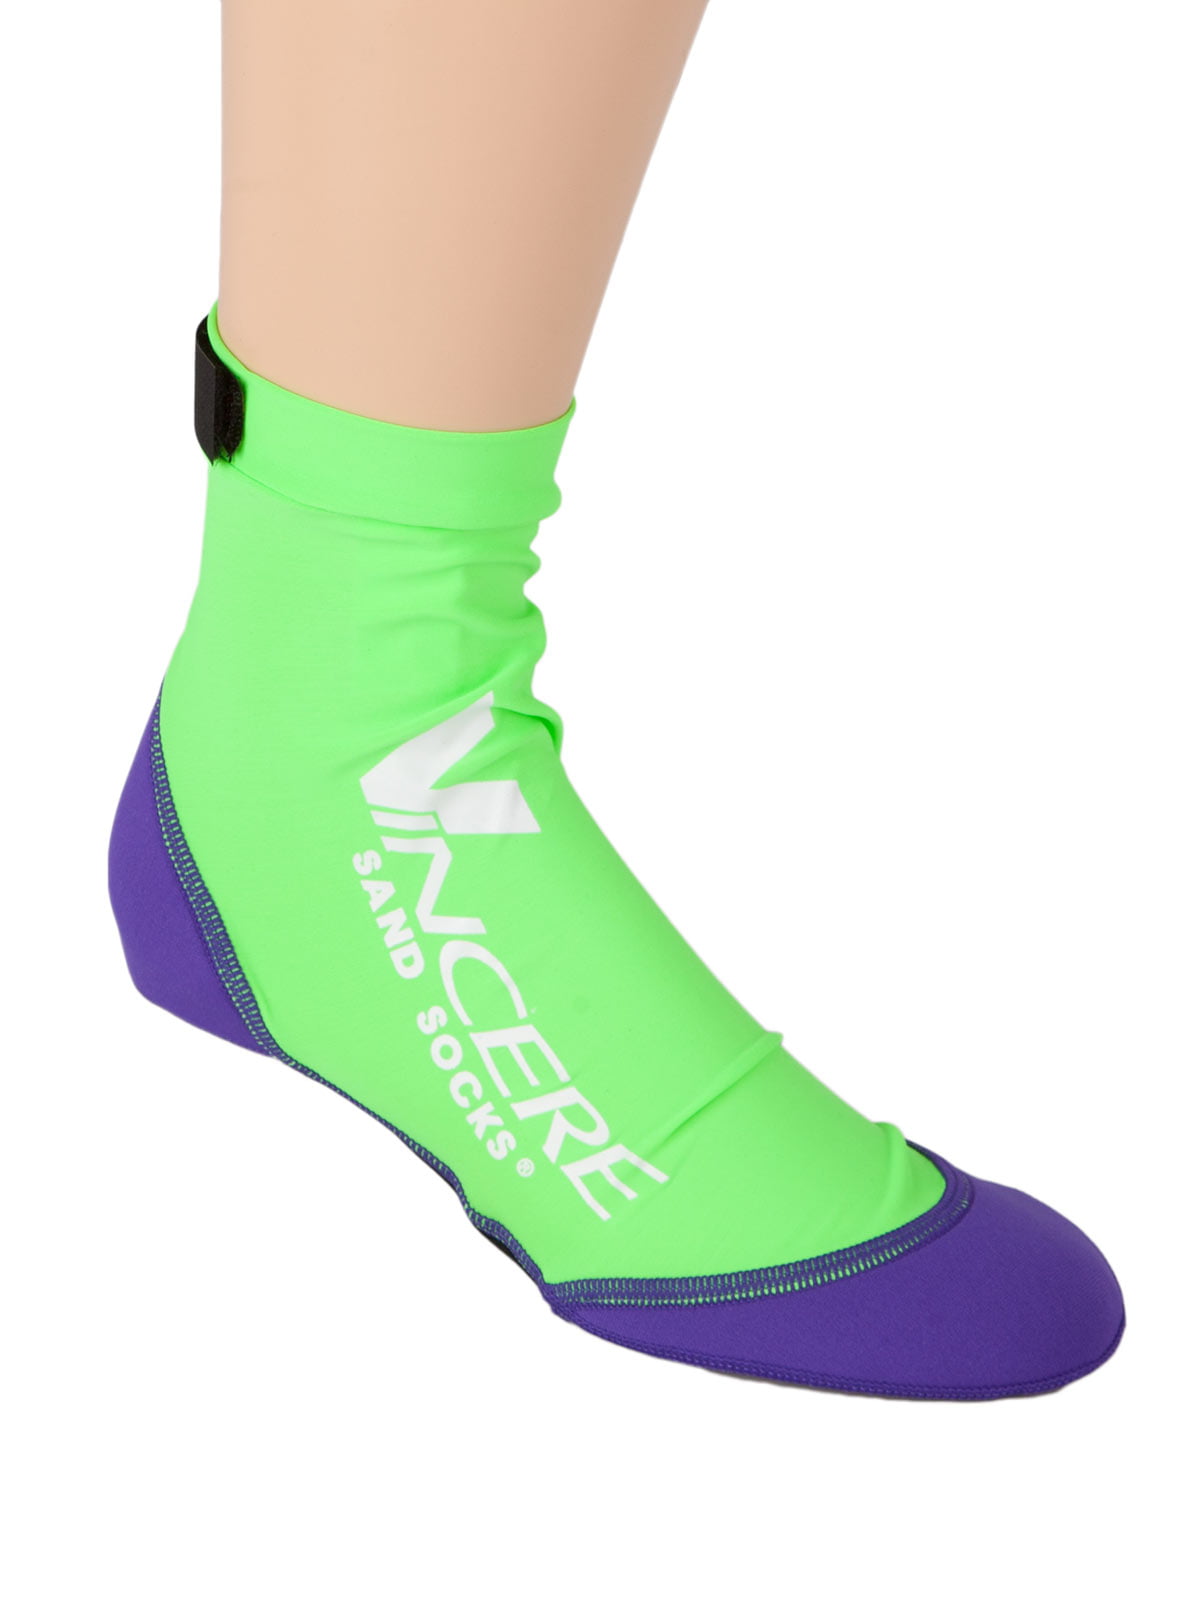 Sand Volleyball and Snorkeling Sand Socks for Beach Soccer